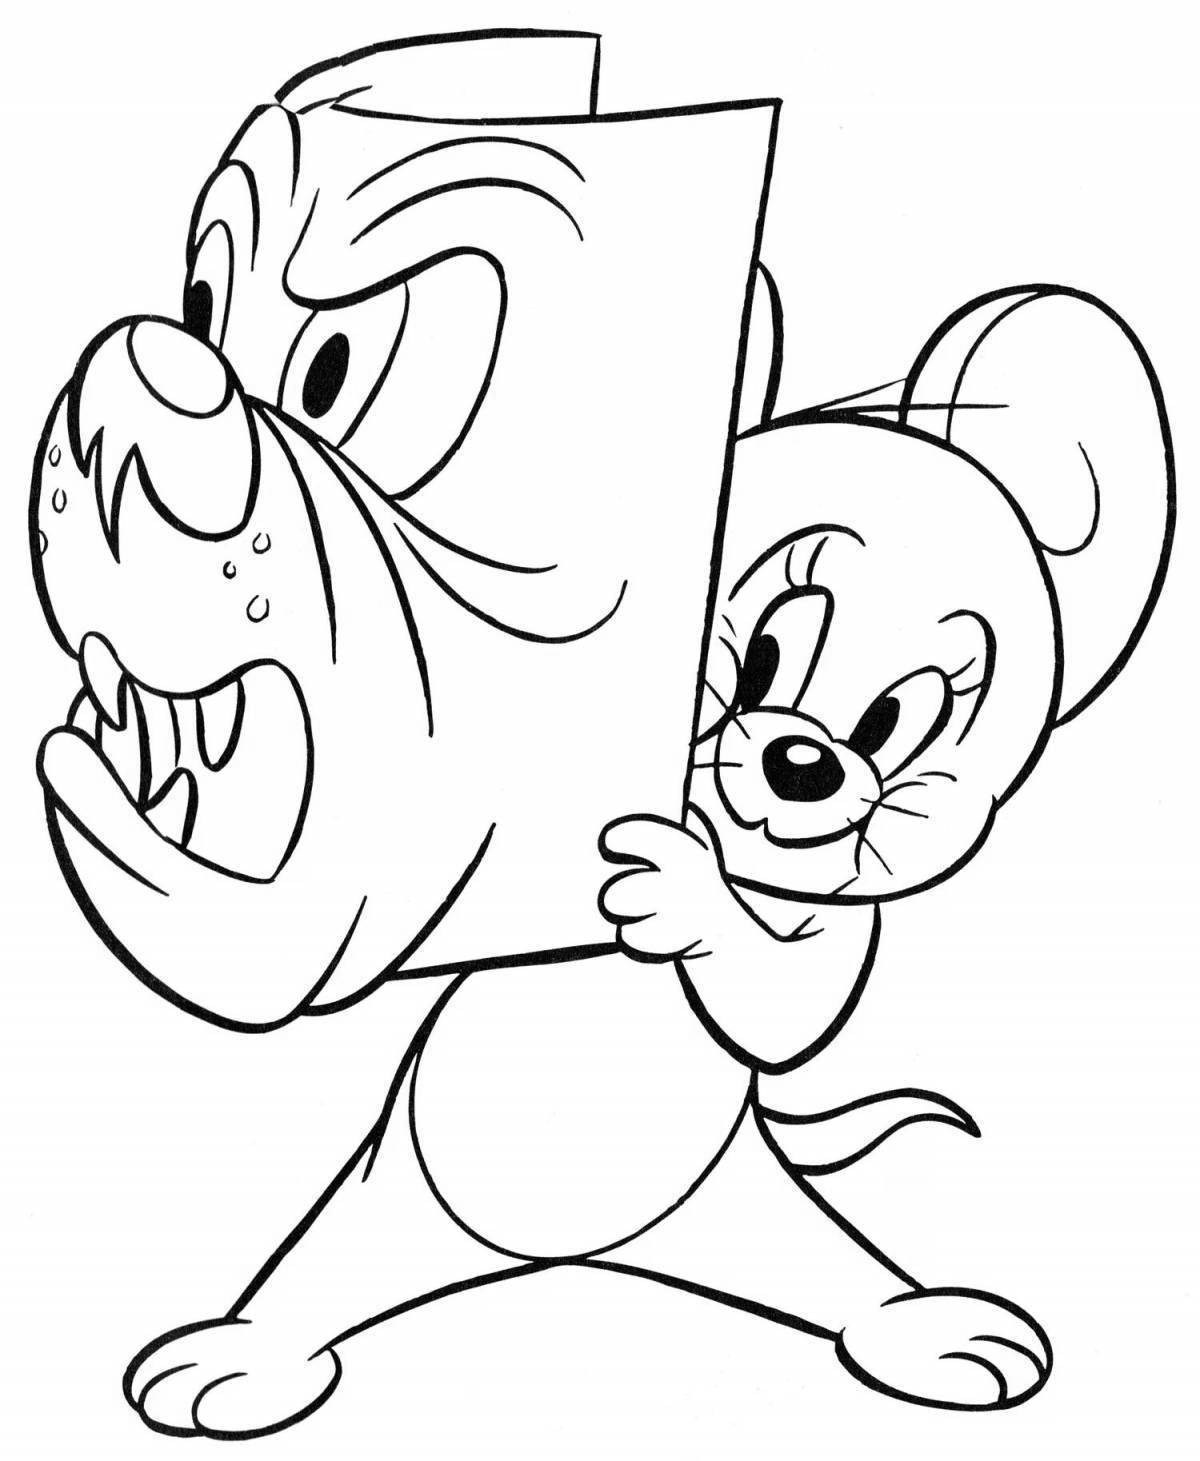 Animated jerry coloring page